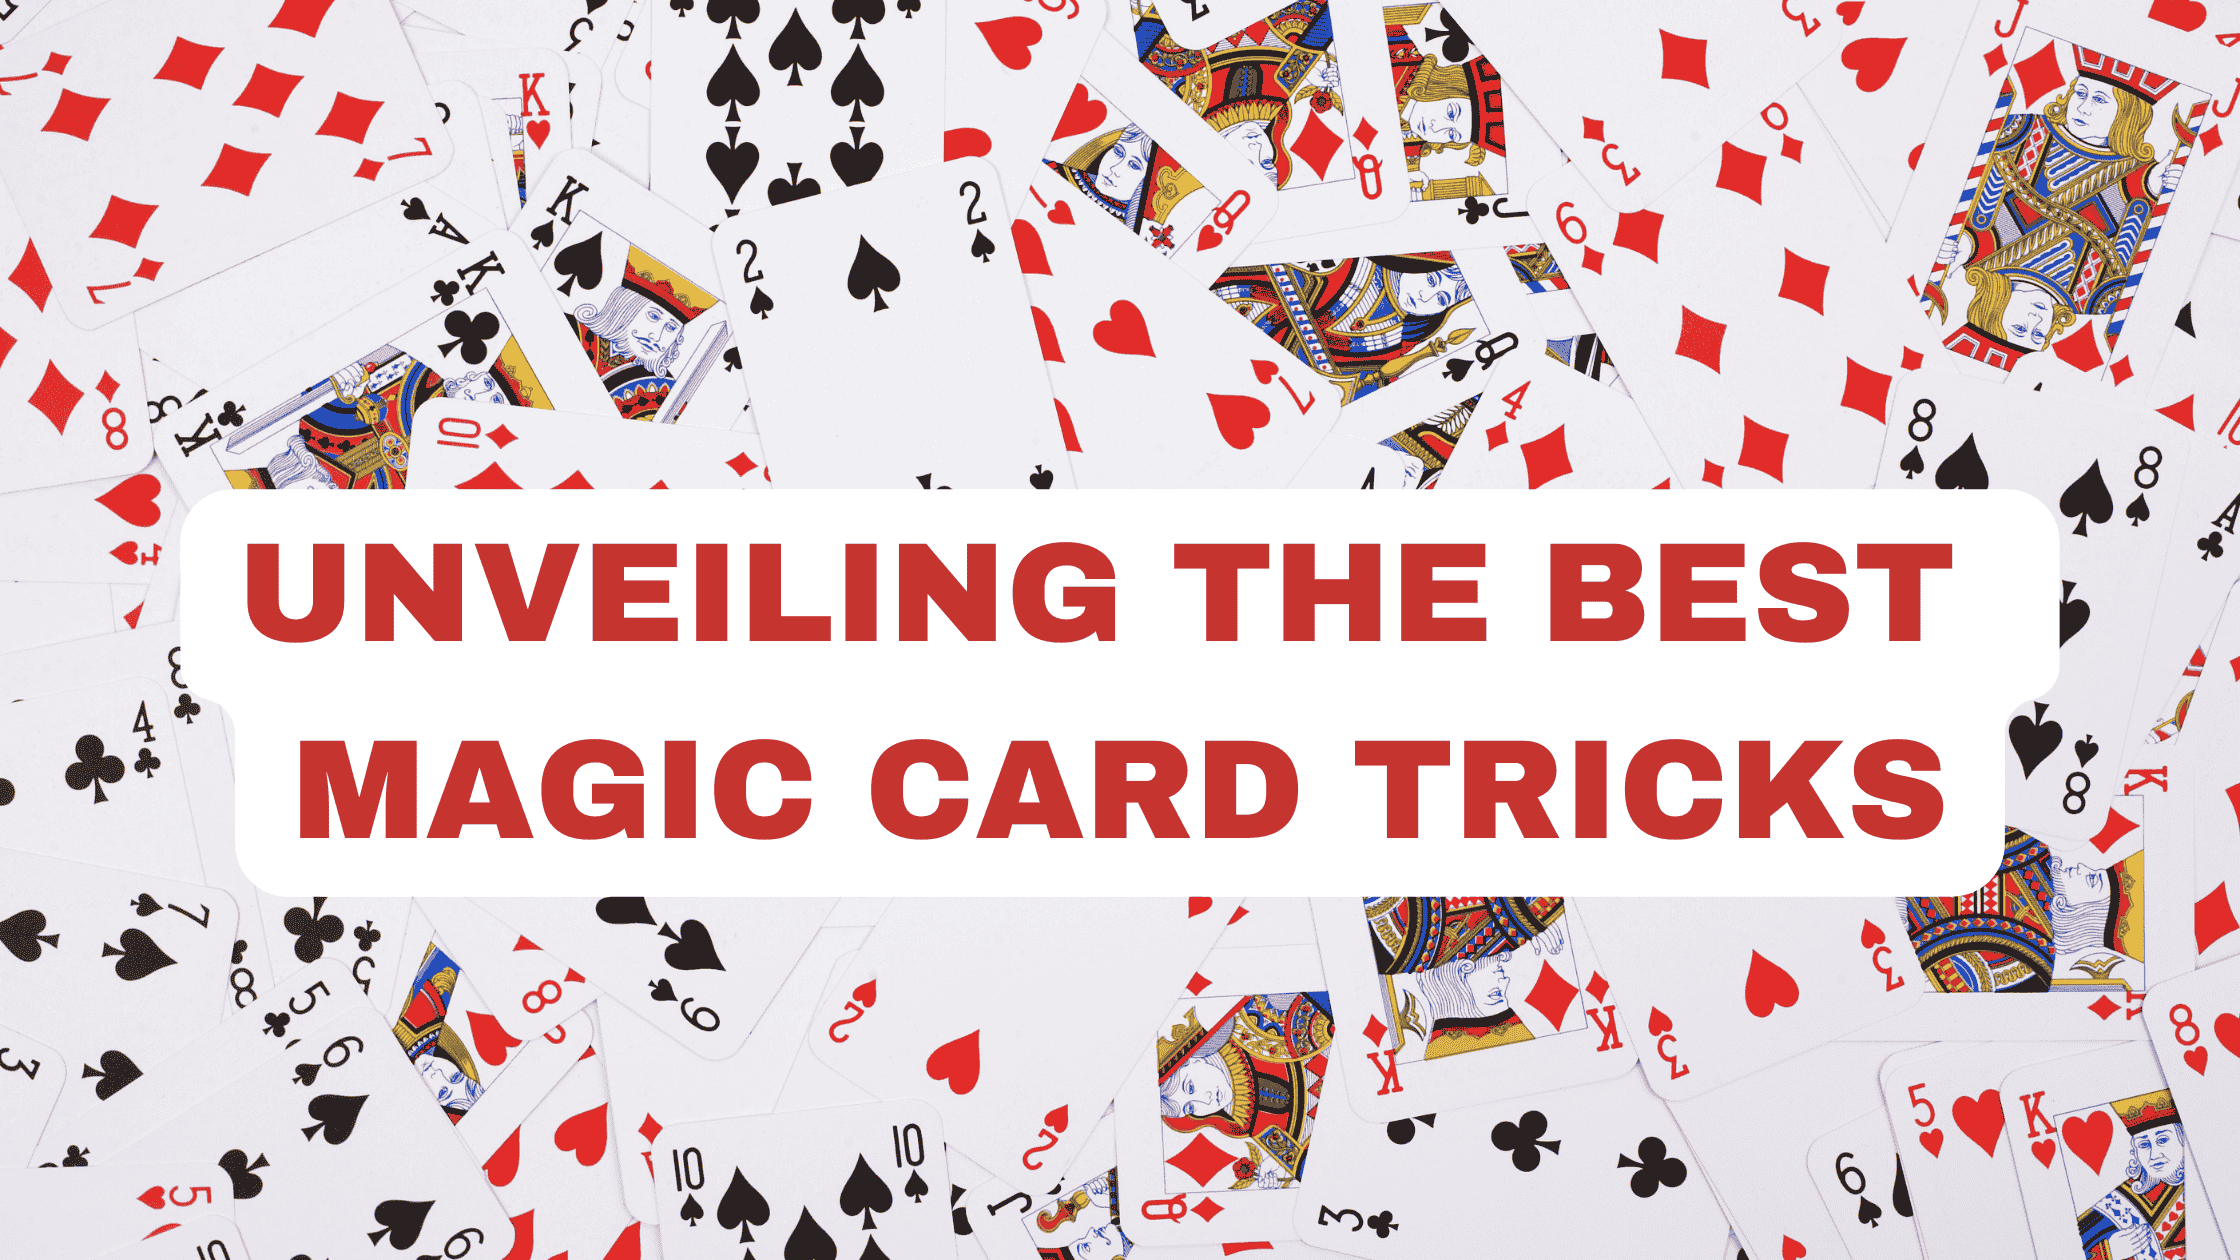 Unveiling the Best Magic Card Tricks